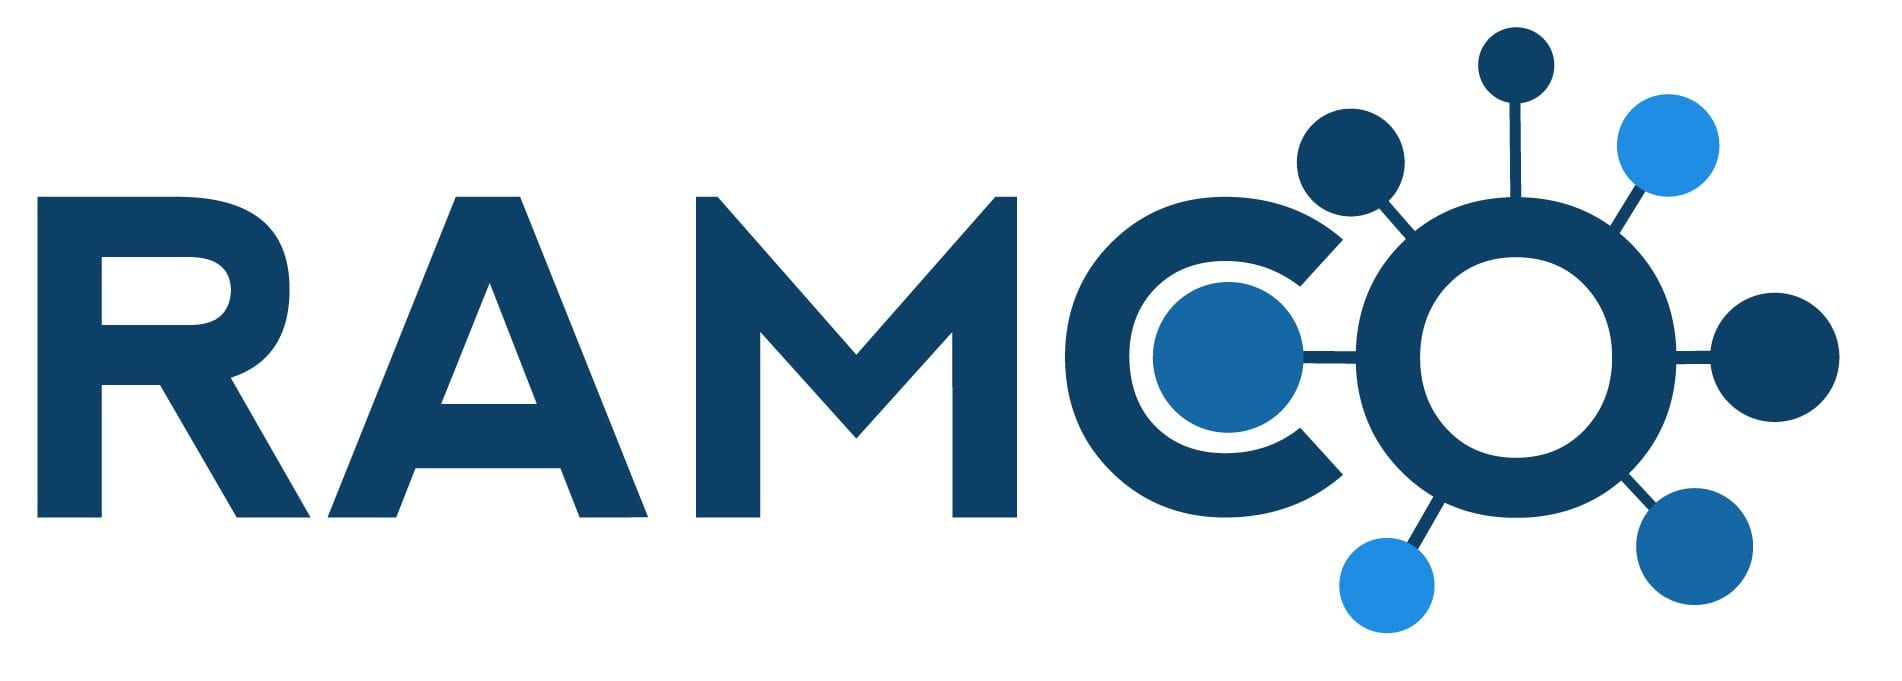 Ramco Update Huge Milestones Partnership Extended Though 2019